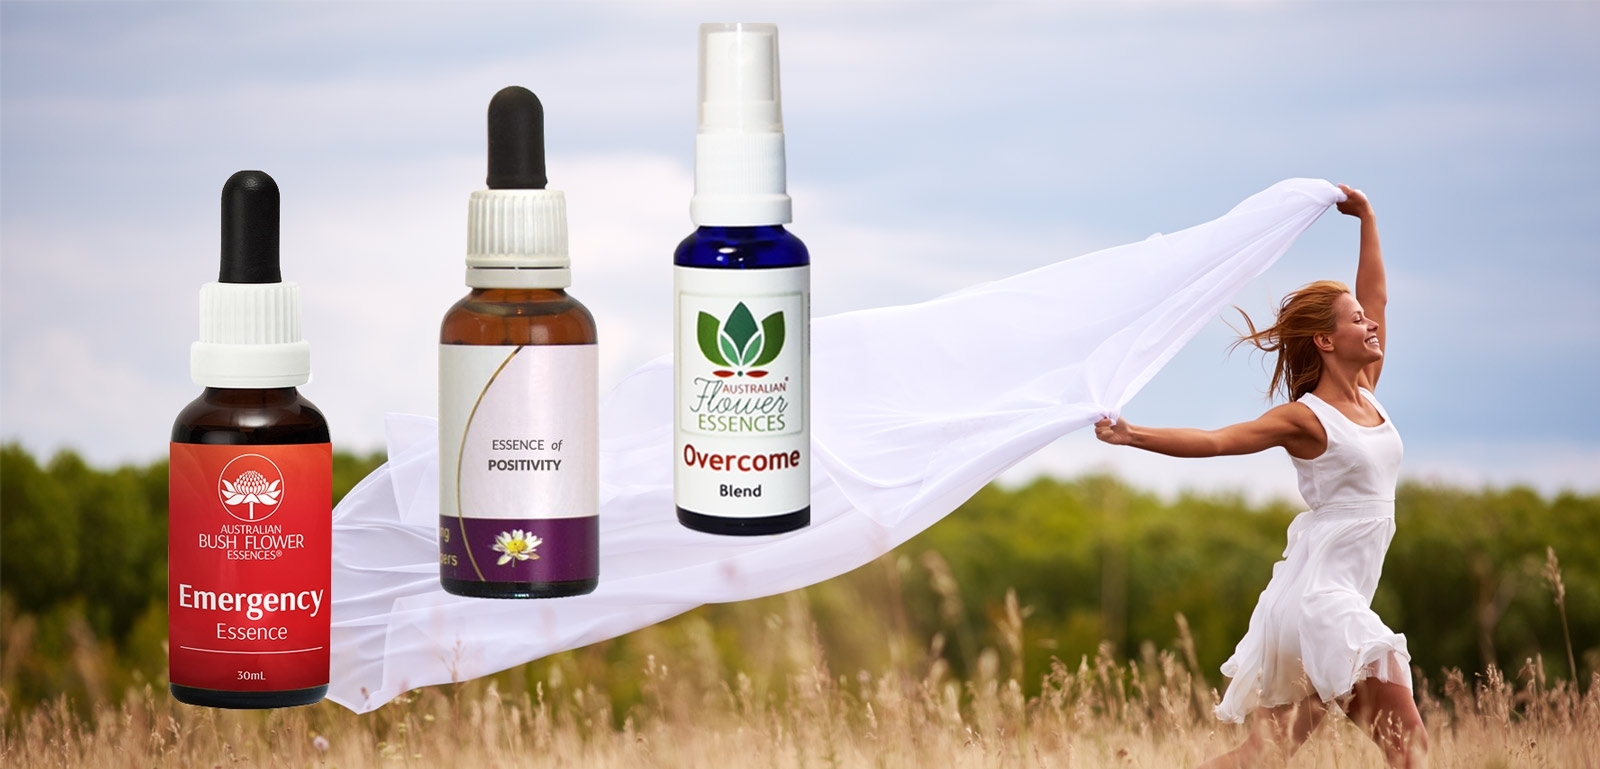 Australian Bush Flower Essences for your well-being